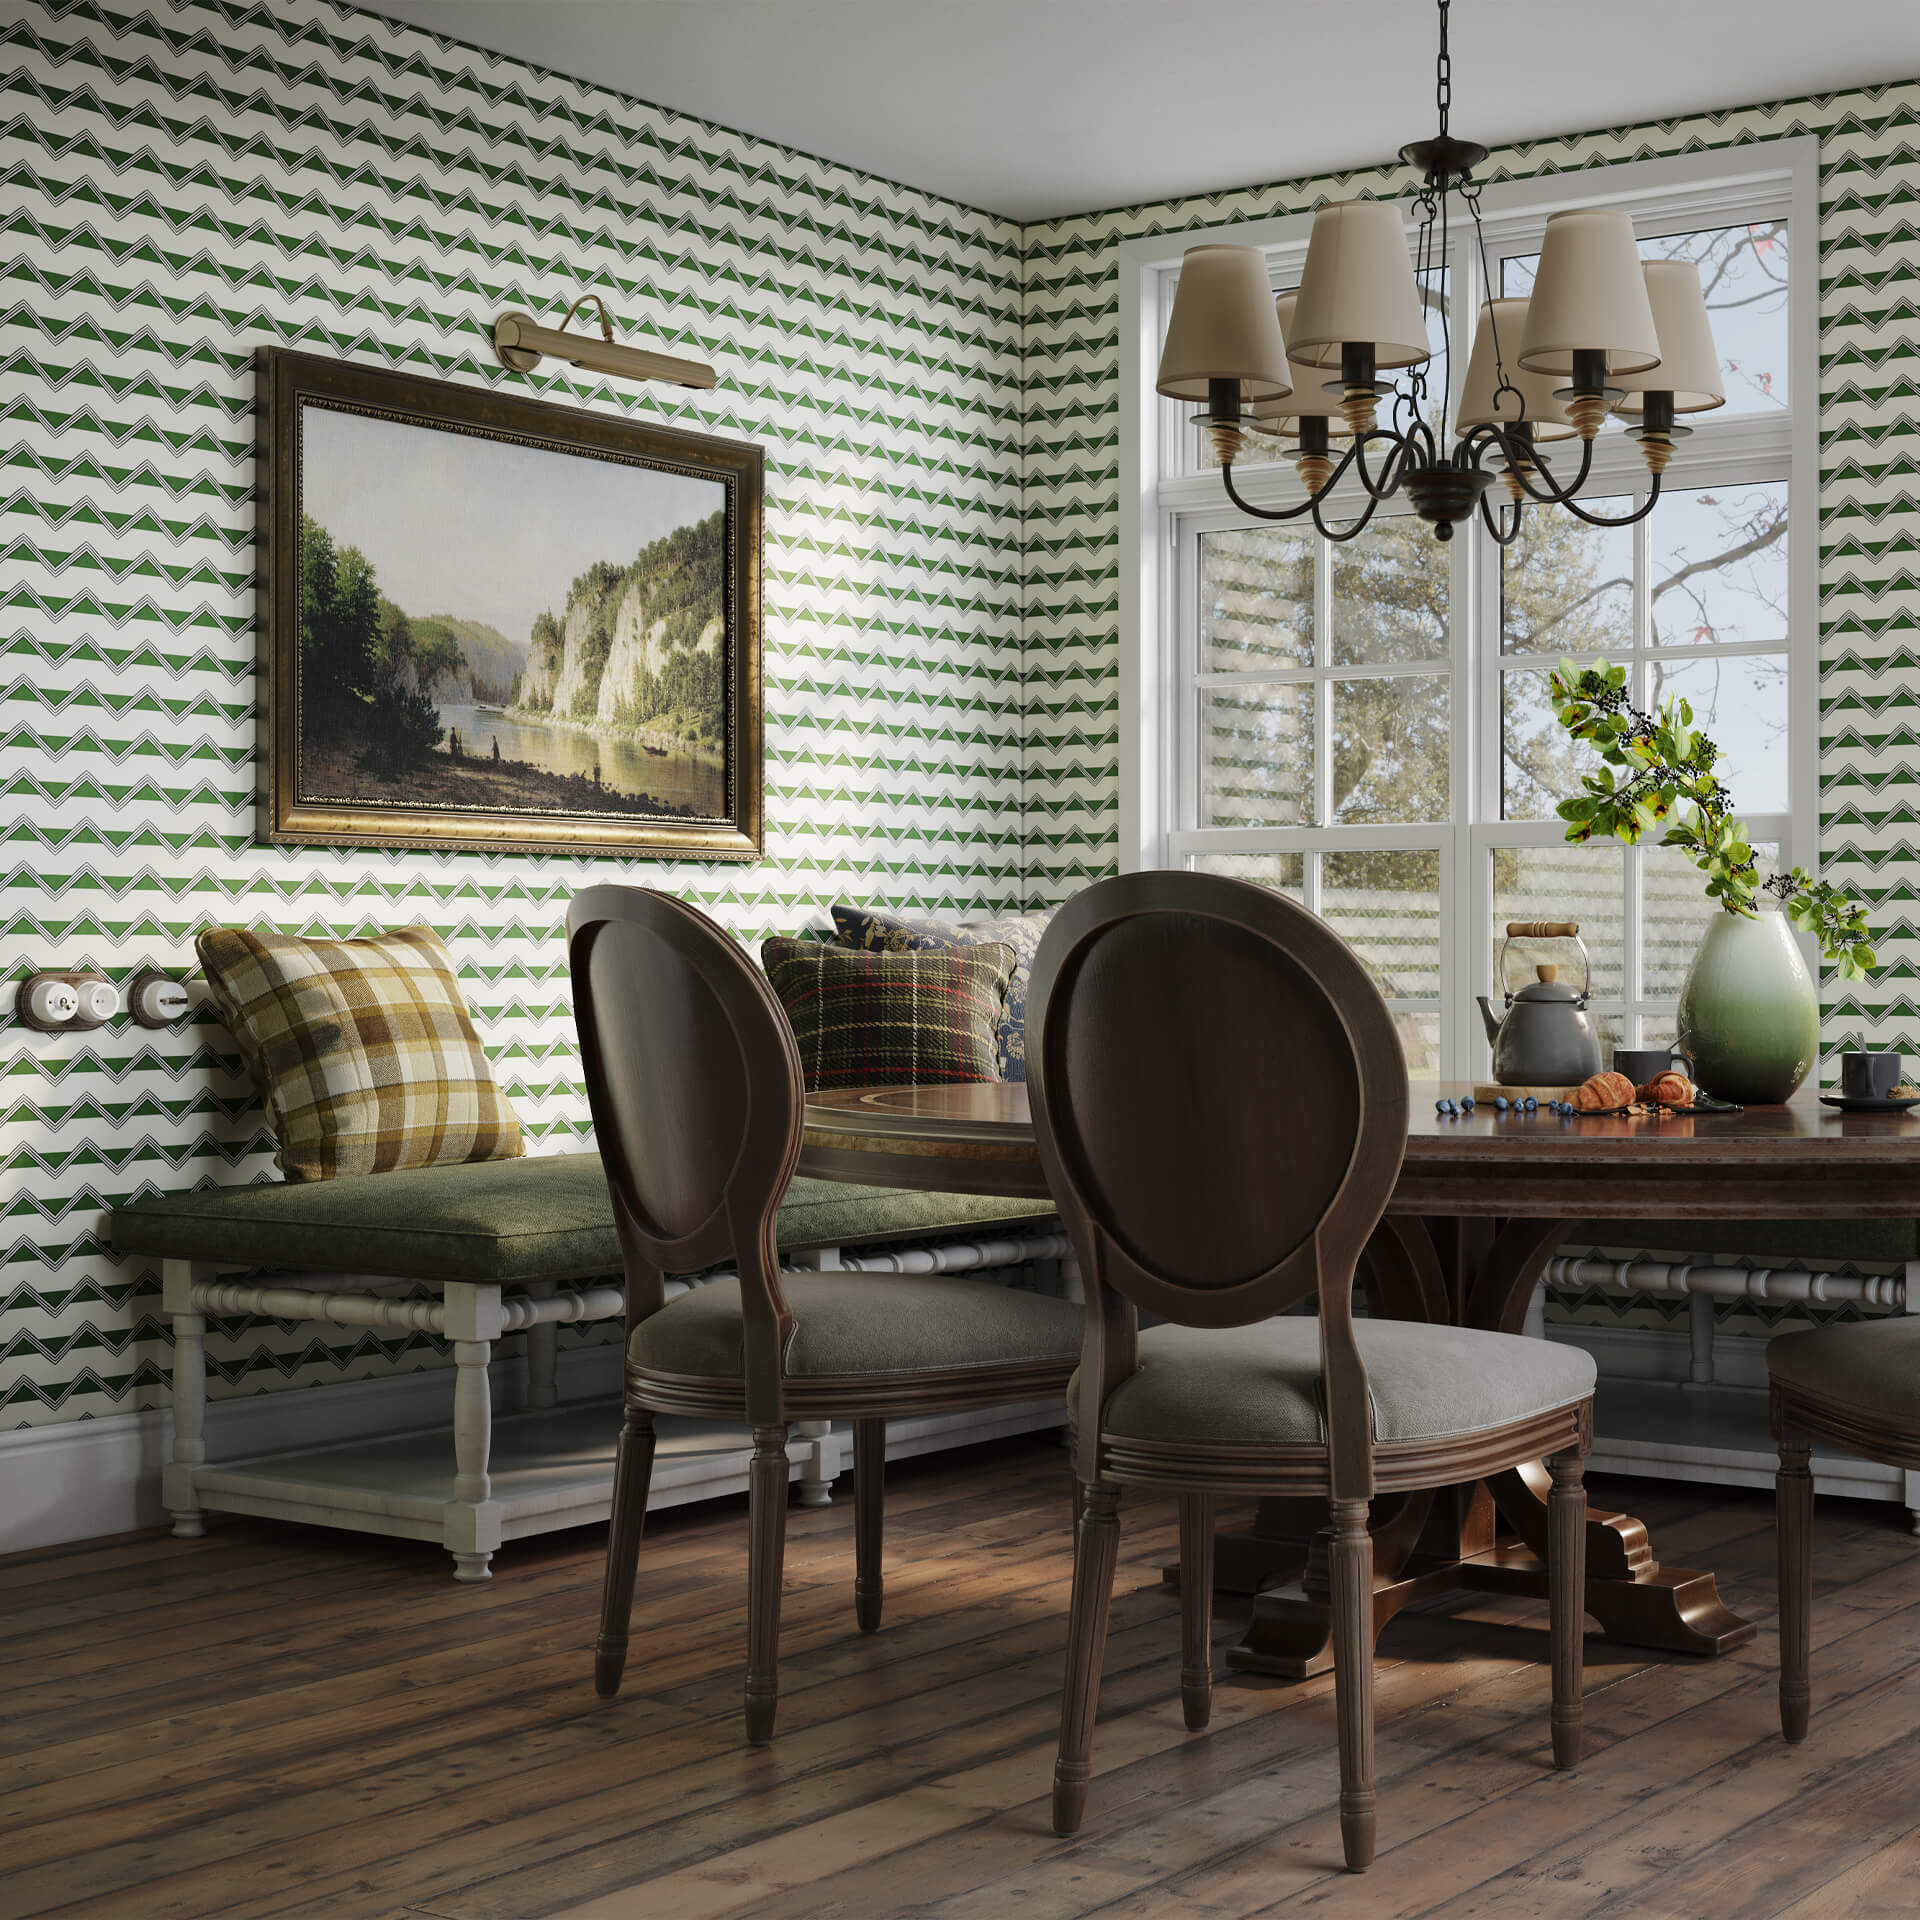 Lifestyle 3D Visualization for Wall Coverings